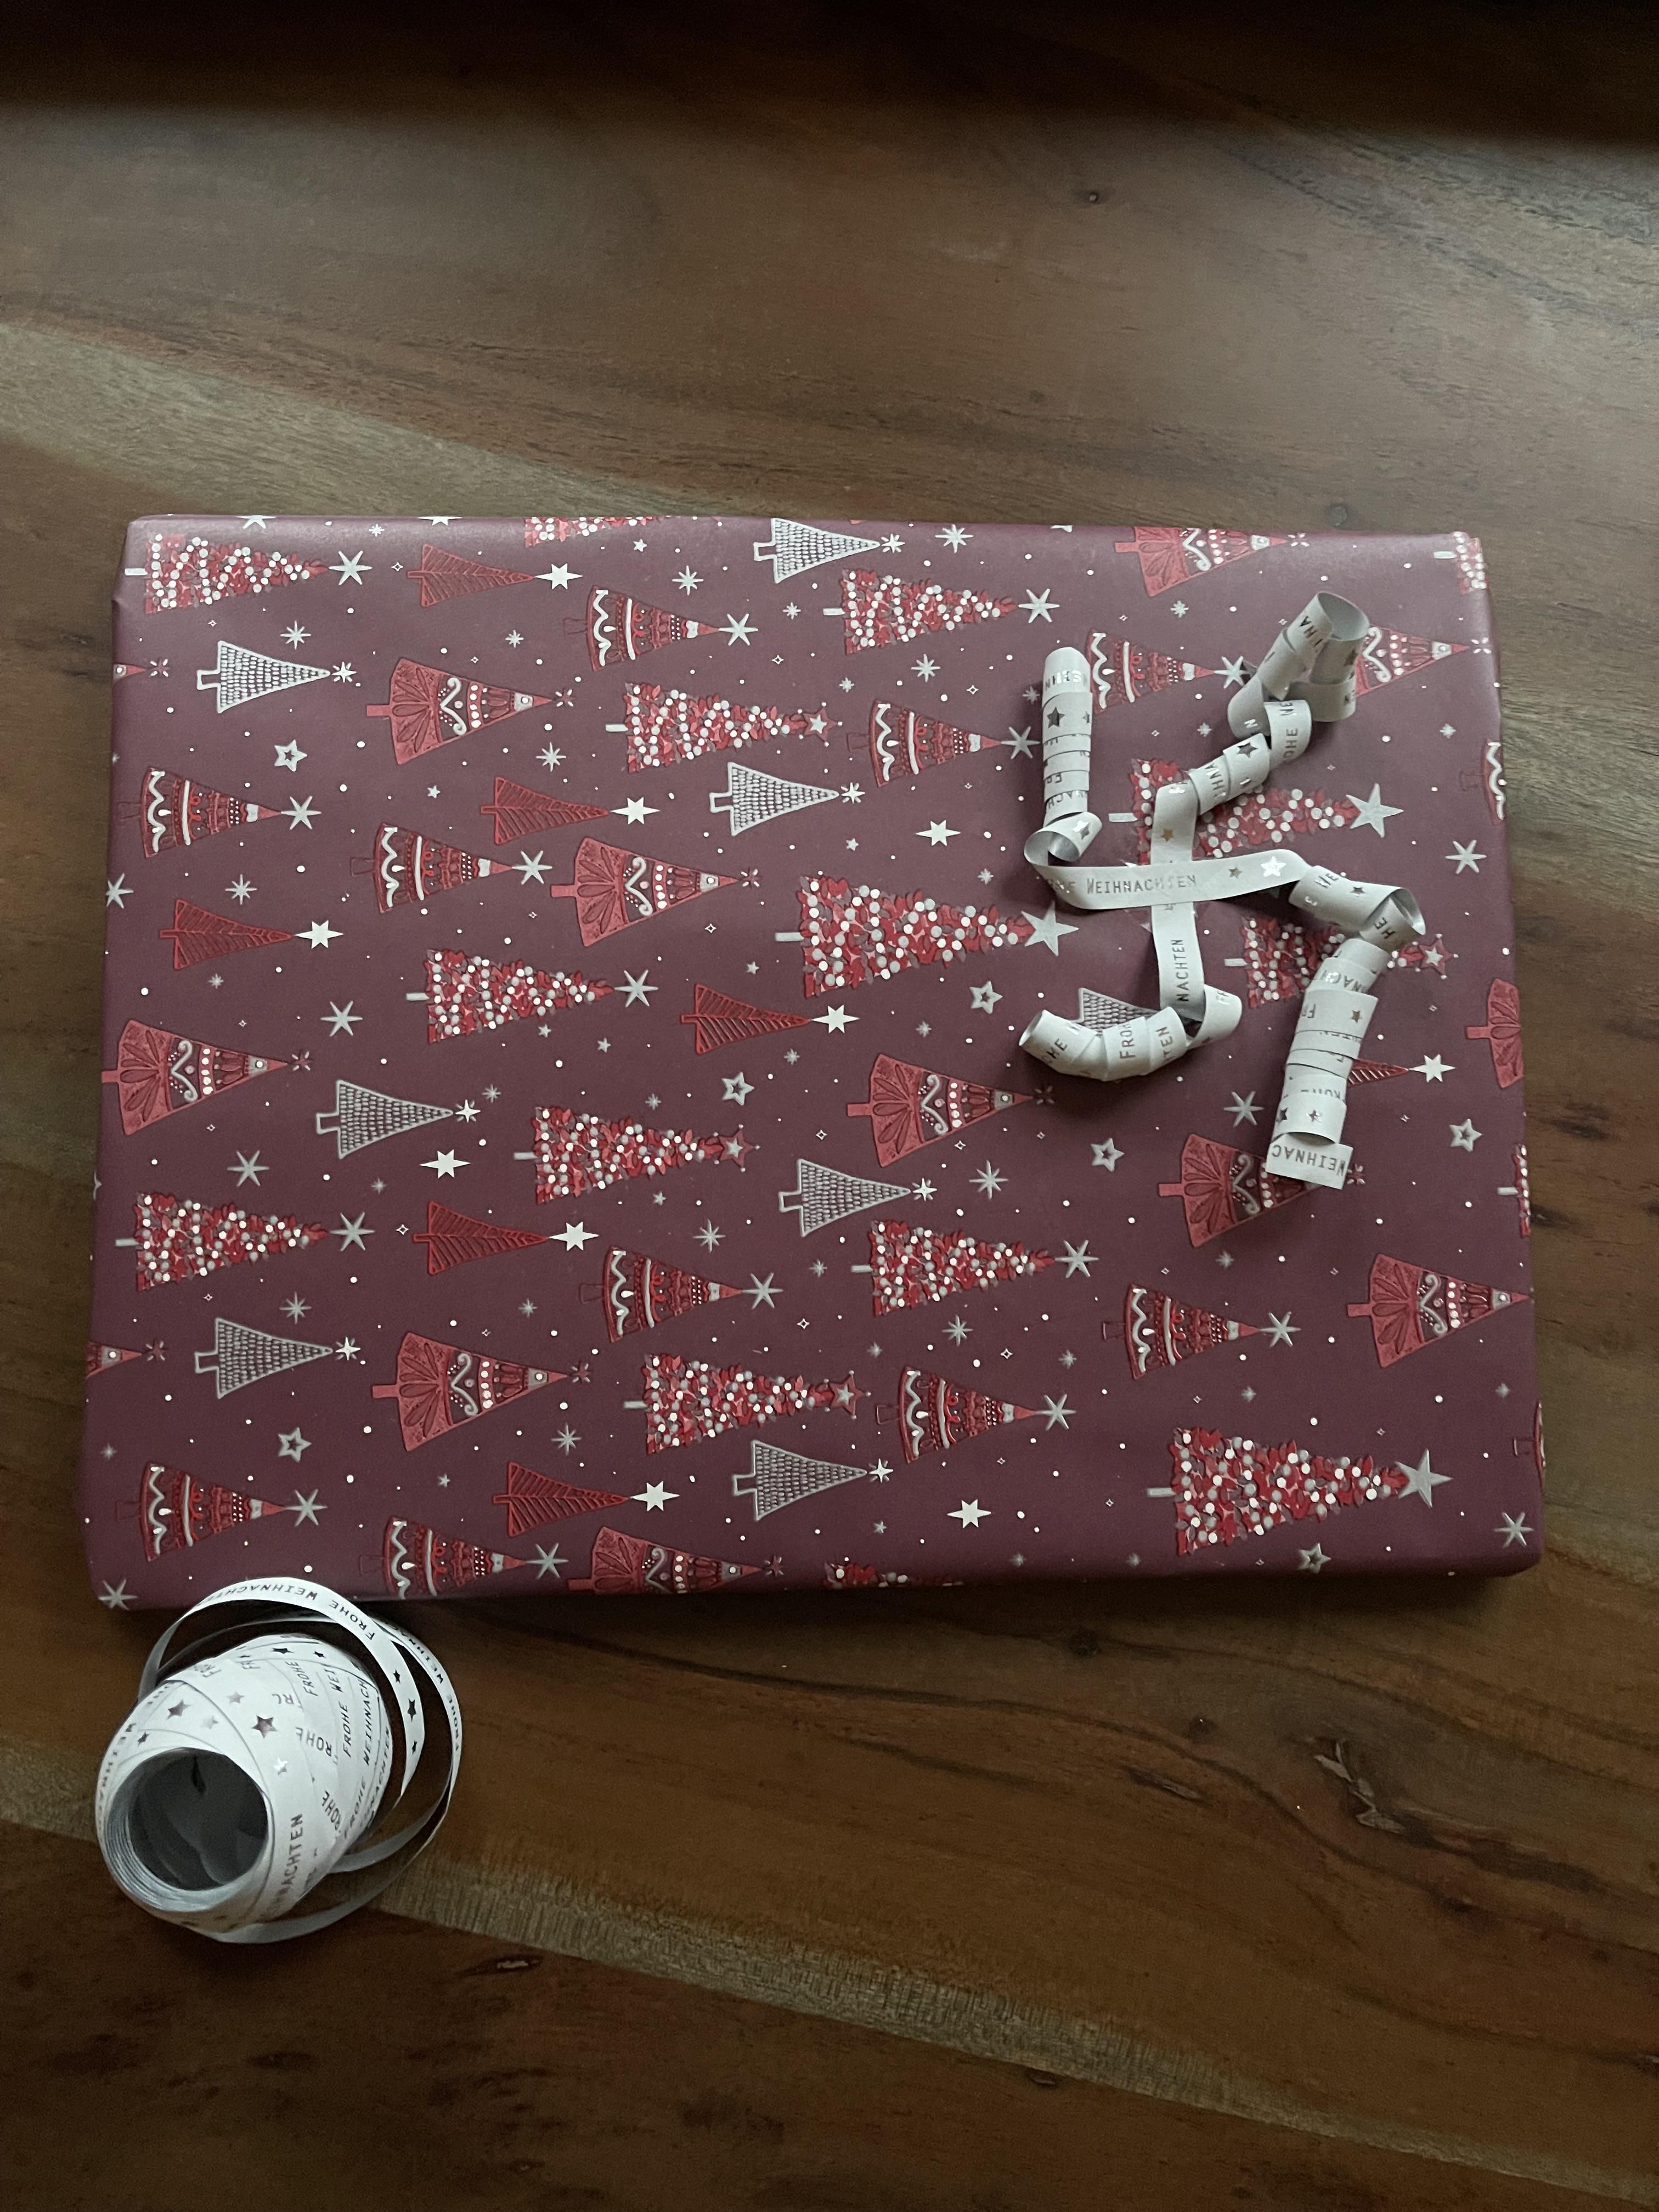 My girlfriend’s unfortunate attempt to wrap a Christmas present